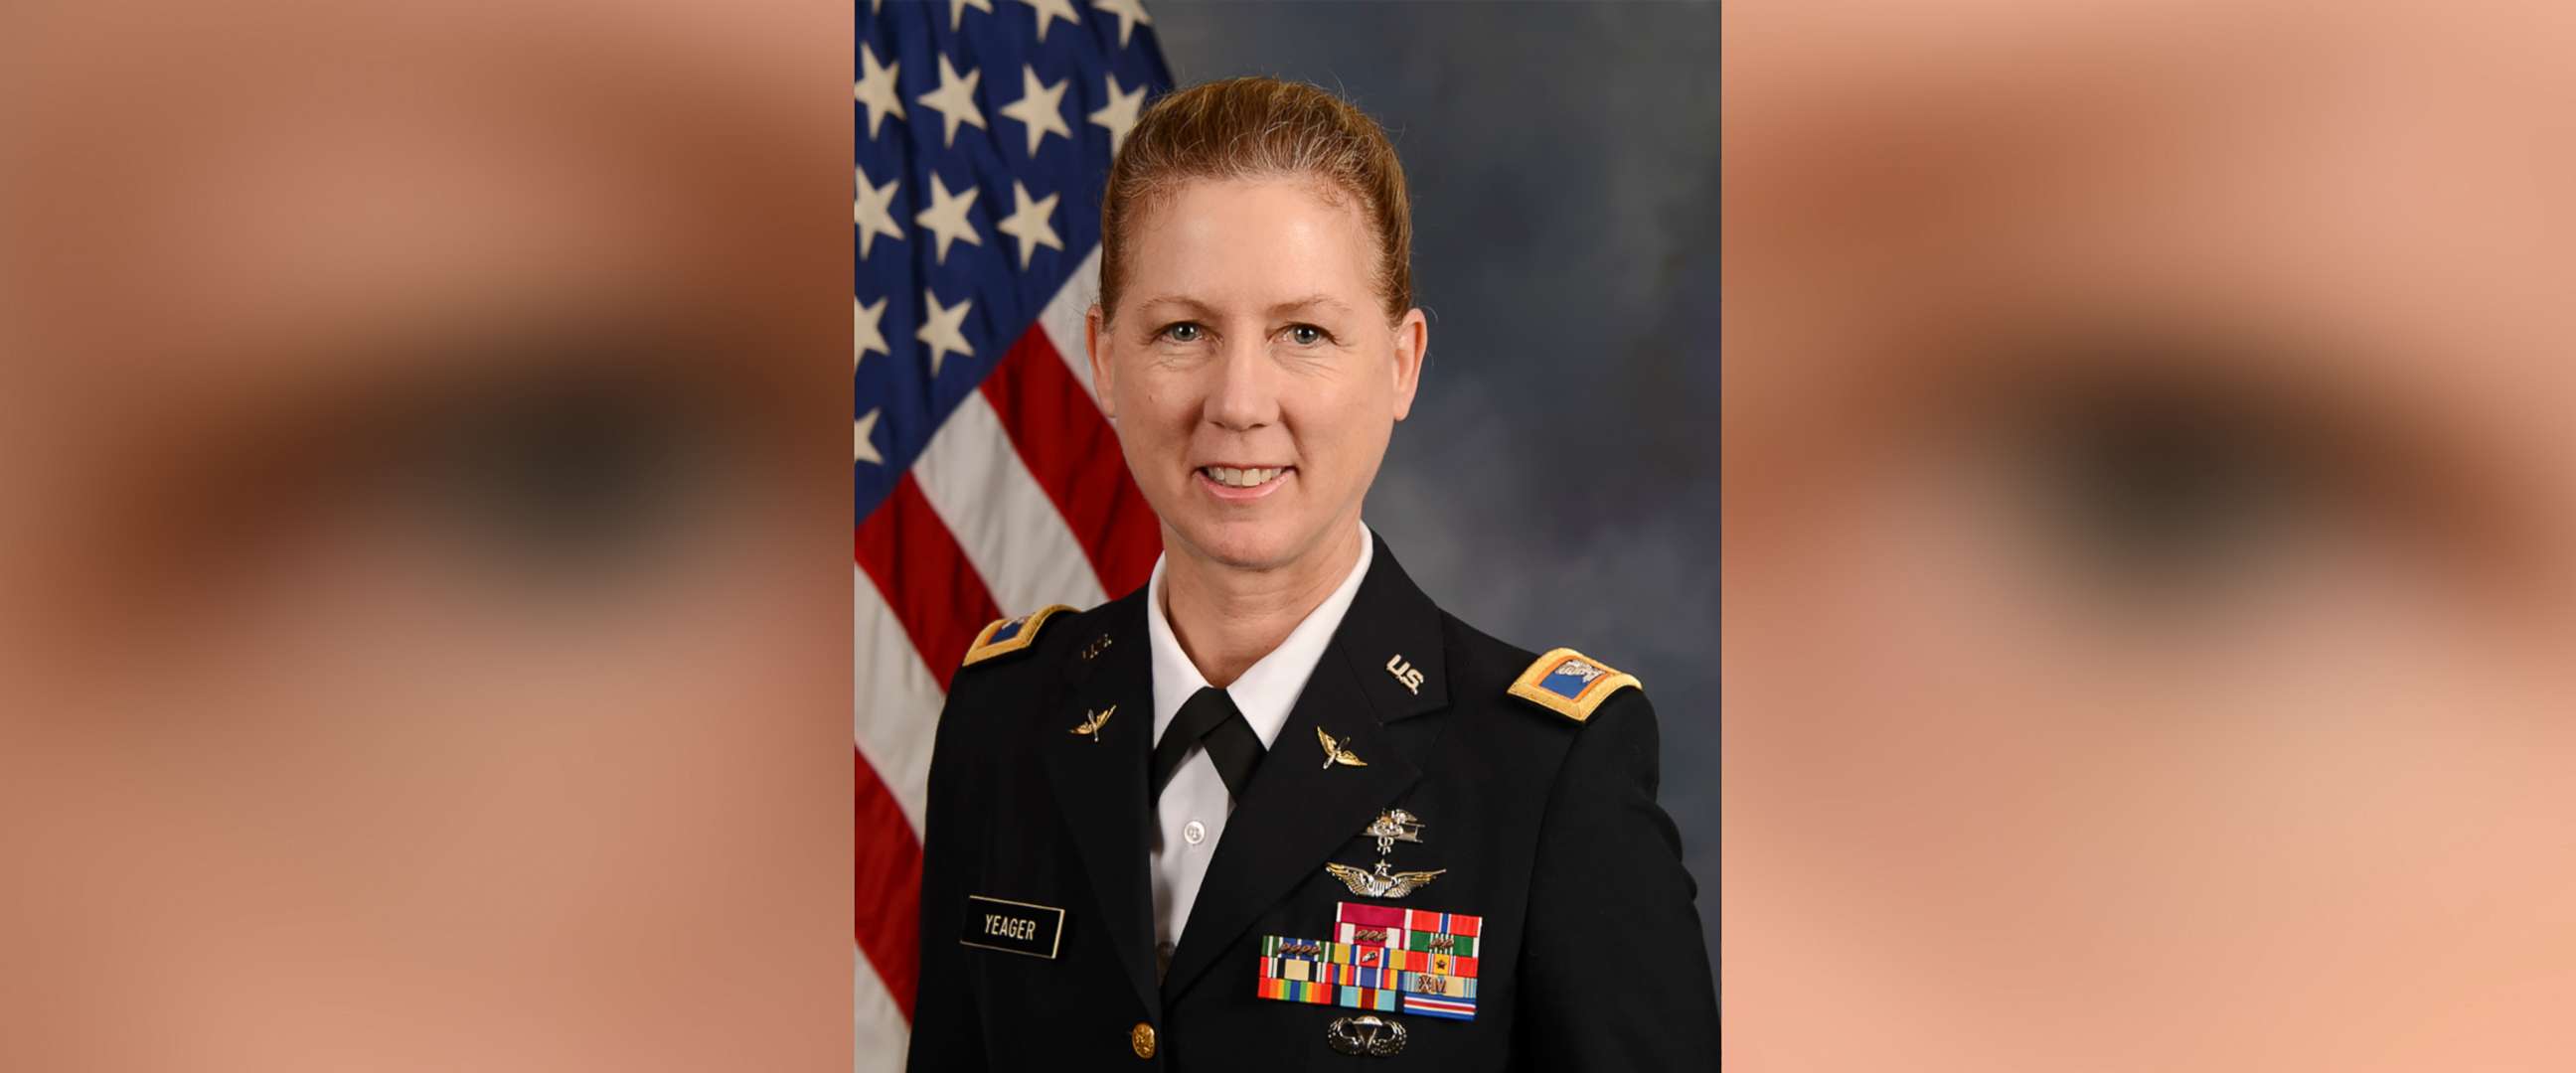 PHOTO: Brig. Gen. Laura Yeager, pictured here as a colonel in 2015, will become the Army's first female infantry division commander. Yeager will assume command of the California Guard's 40th Infantry Division on June 29, 2019.